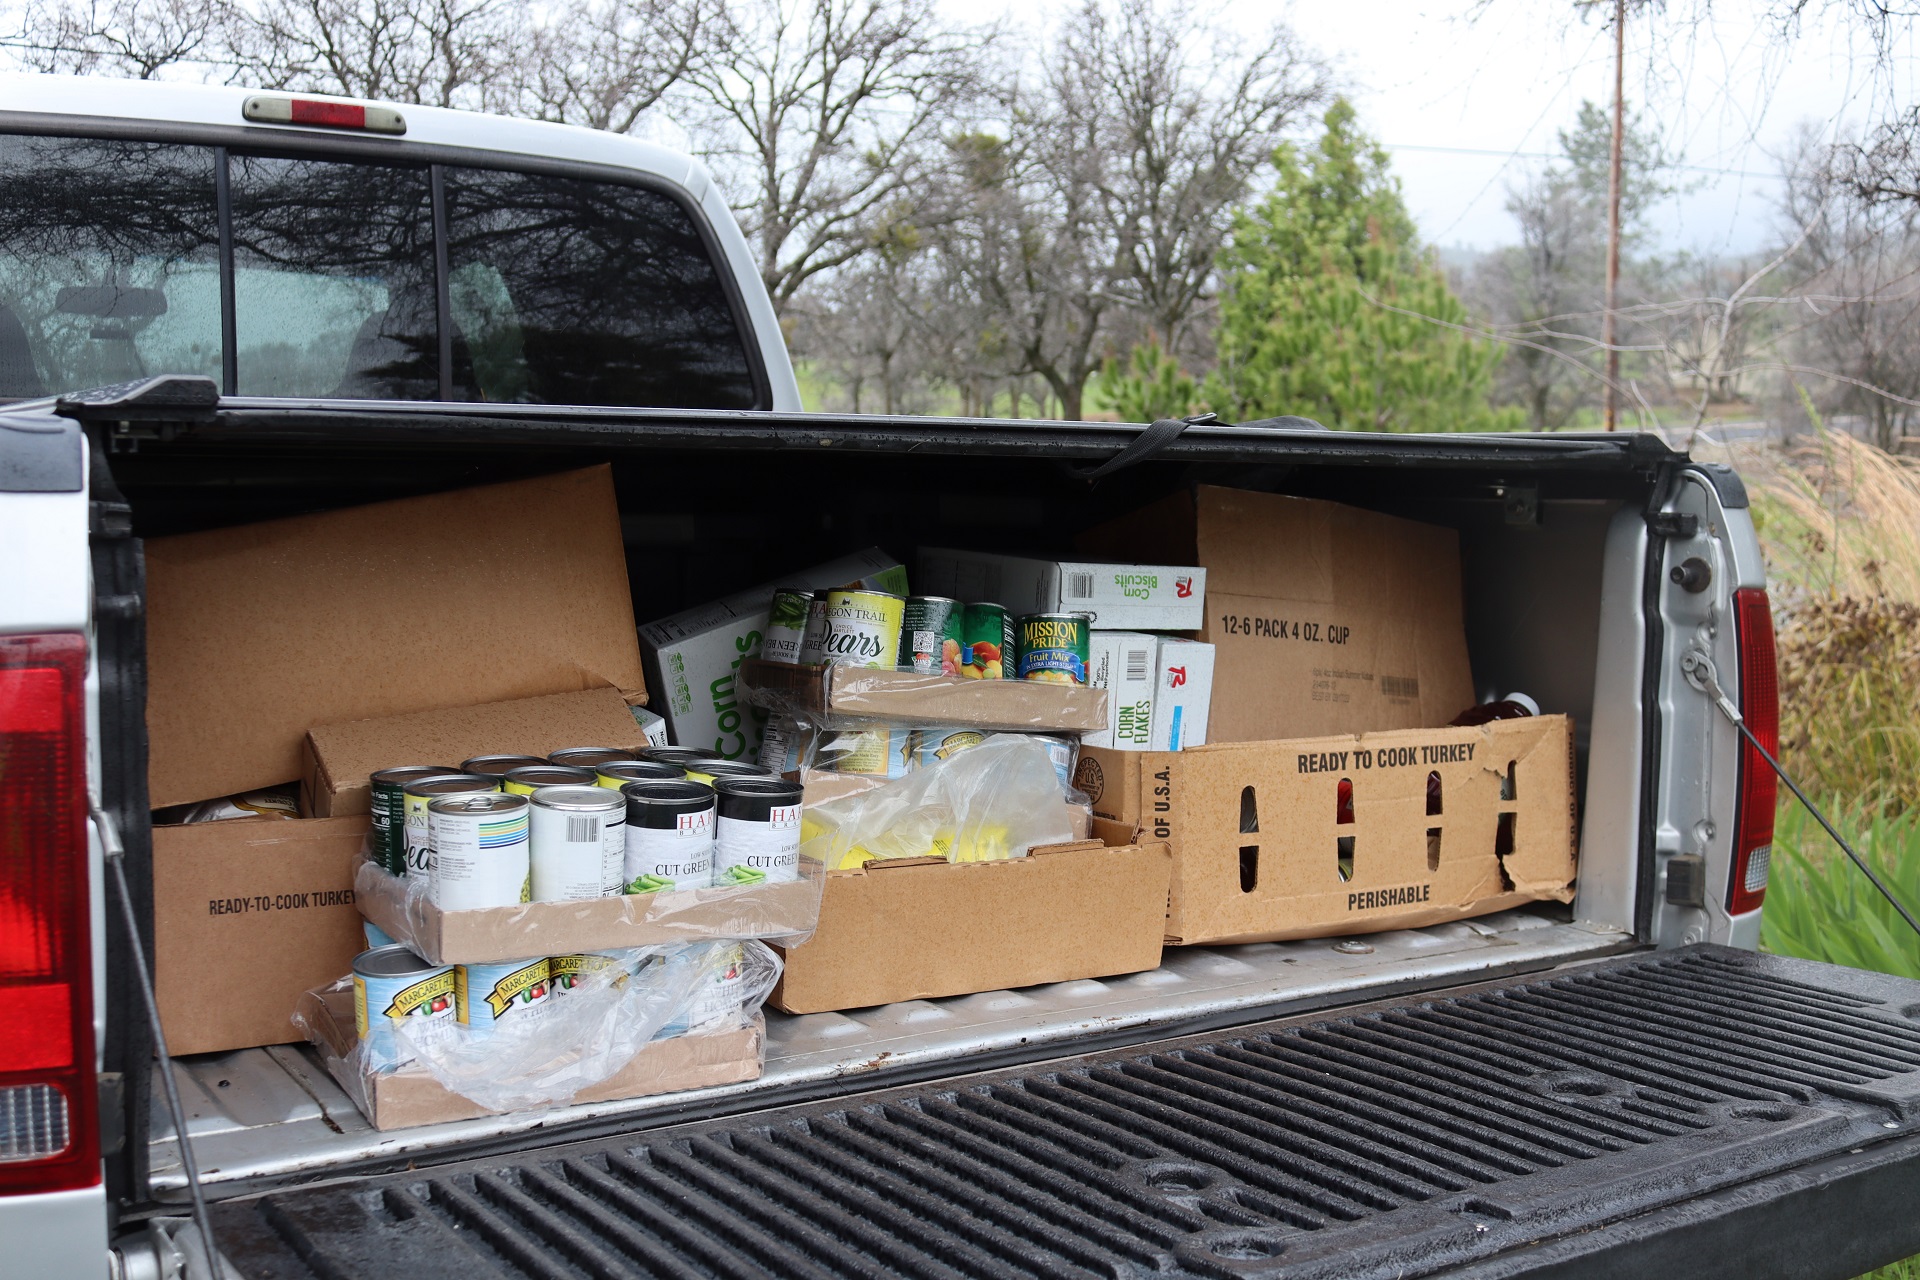 California Valley Miwok Tribe's food distribution in F250 trunk.